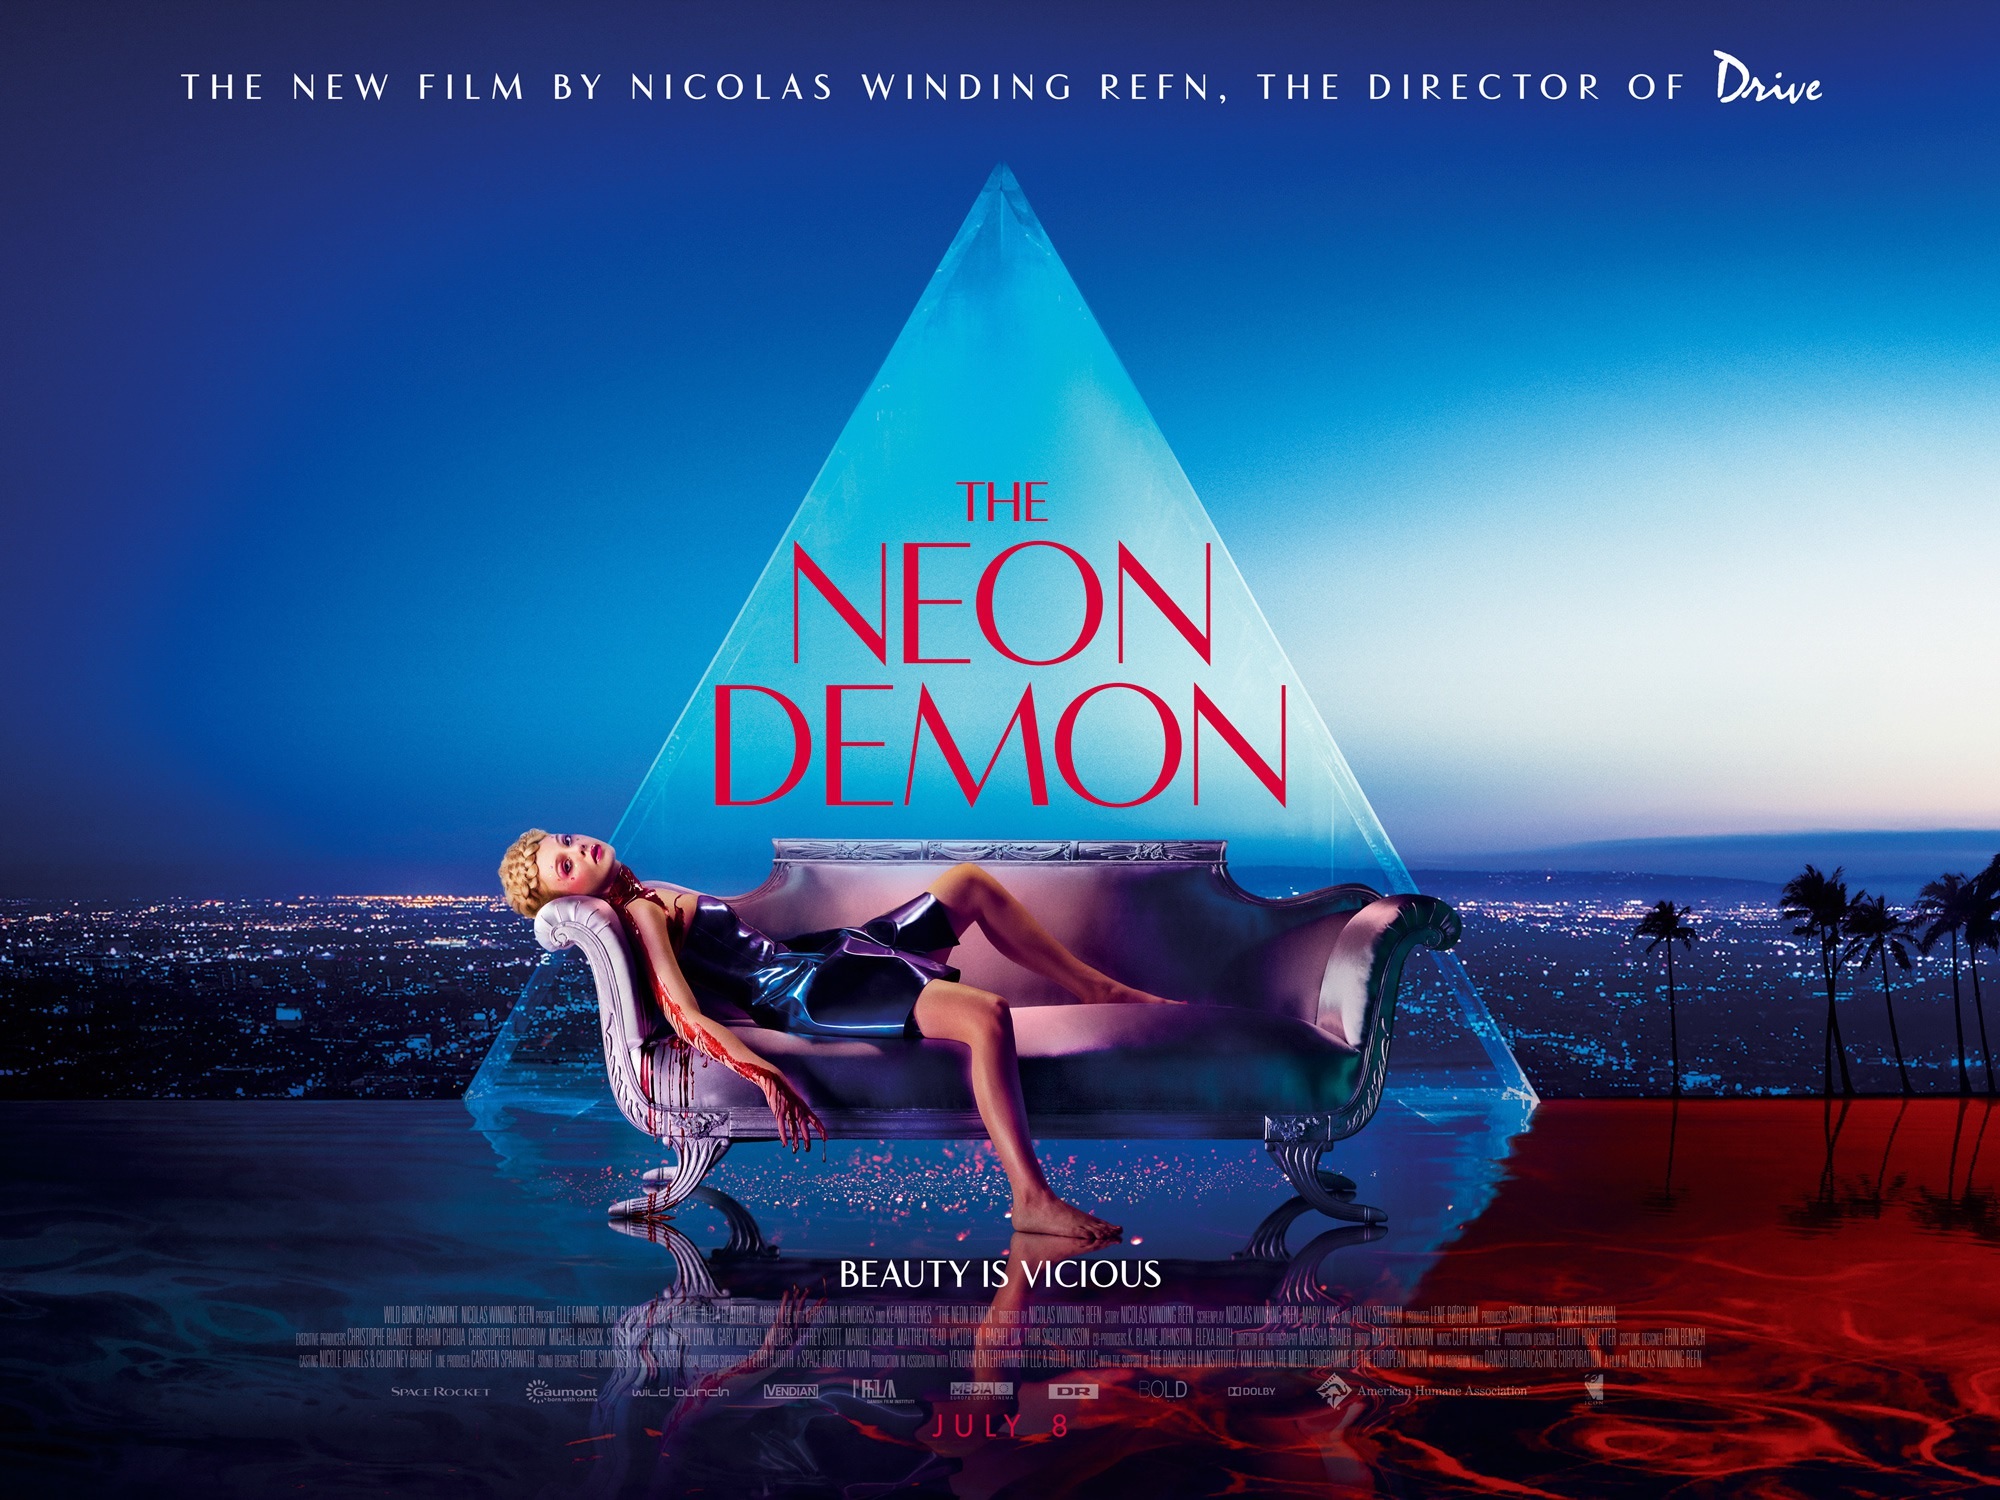 The Neon Demon film review: Beauty is the beast